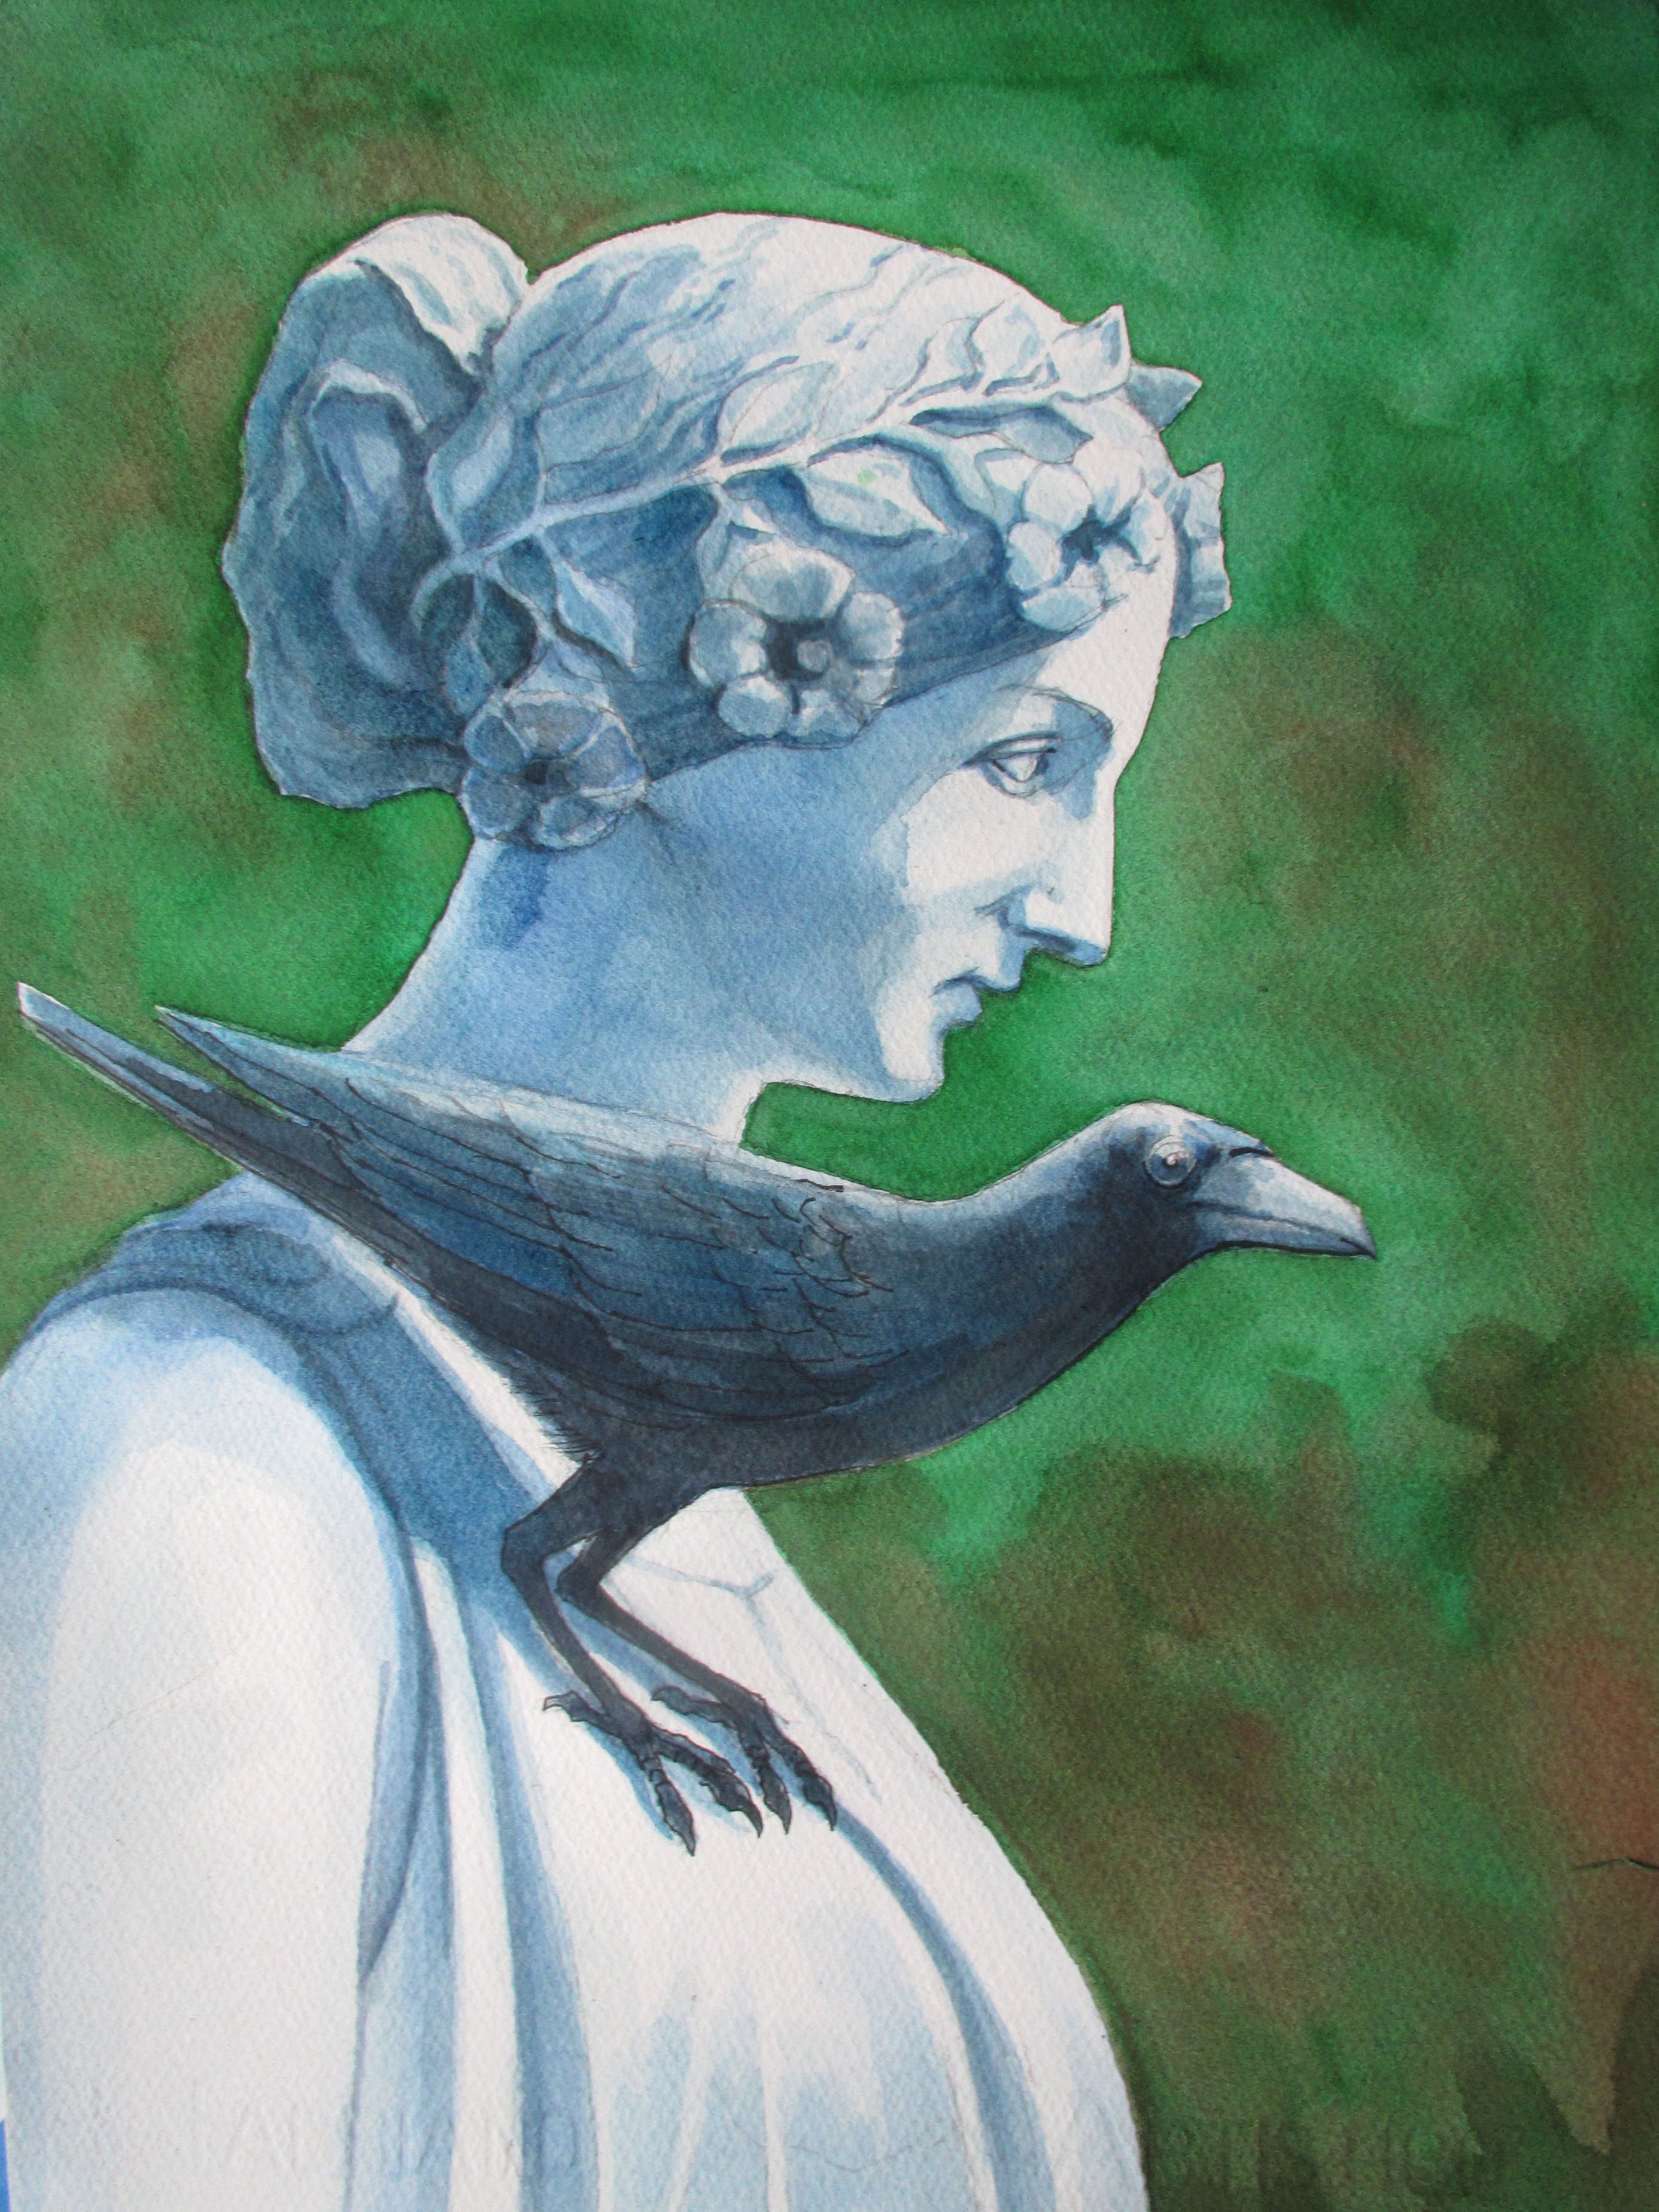 Watercolor painting, The Guardian, of a statue with bird on its shoulder by Peter Mikulka